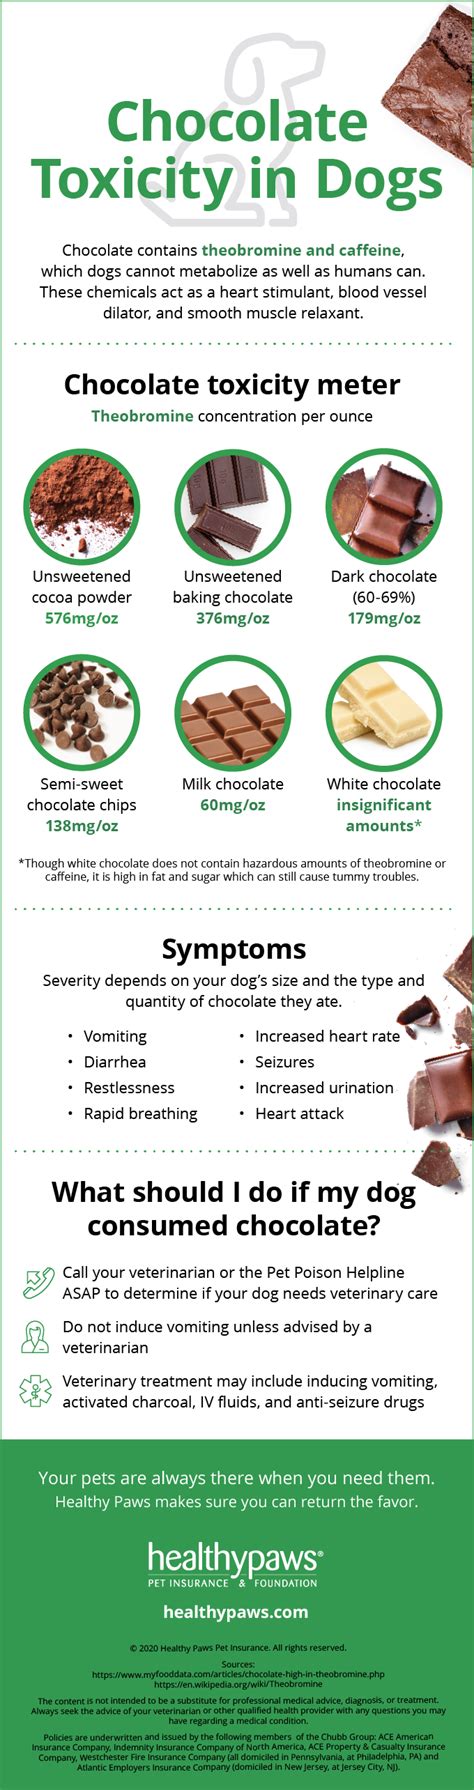 Infographic Chocolate Toxicity In Dogs Healthy Paws Pet Insurance